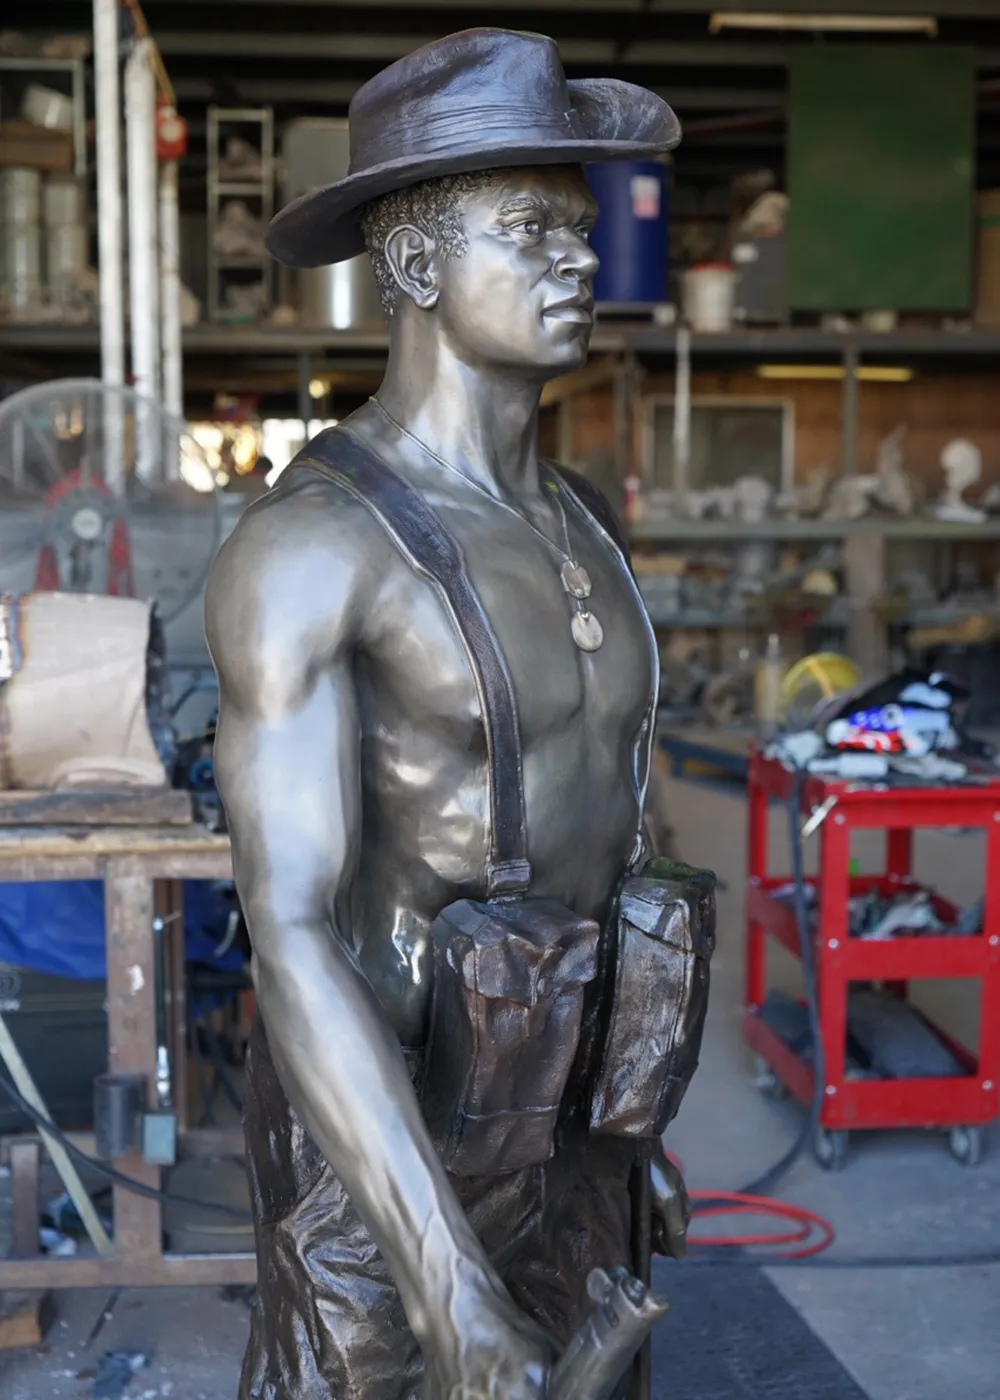 Full-length view of the intricately detailed bronze statue created by Sculpt Studios, representing the valor of the Torres Strait Islander soldiers from the WW2 Light Infantry Battalion.